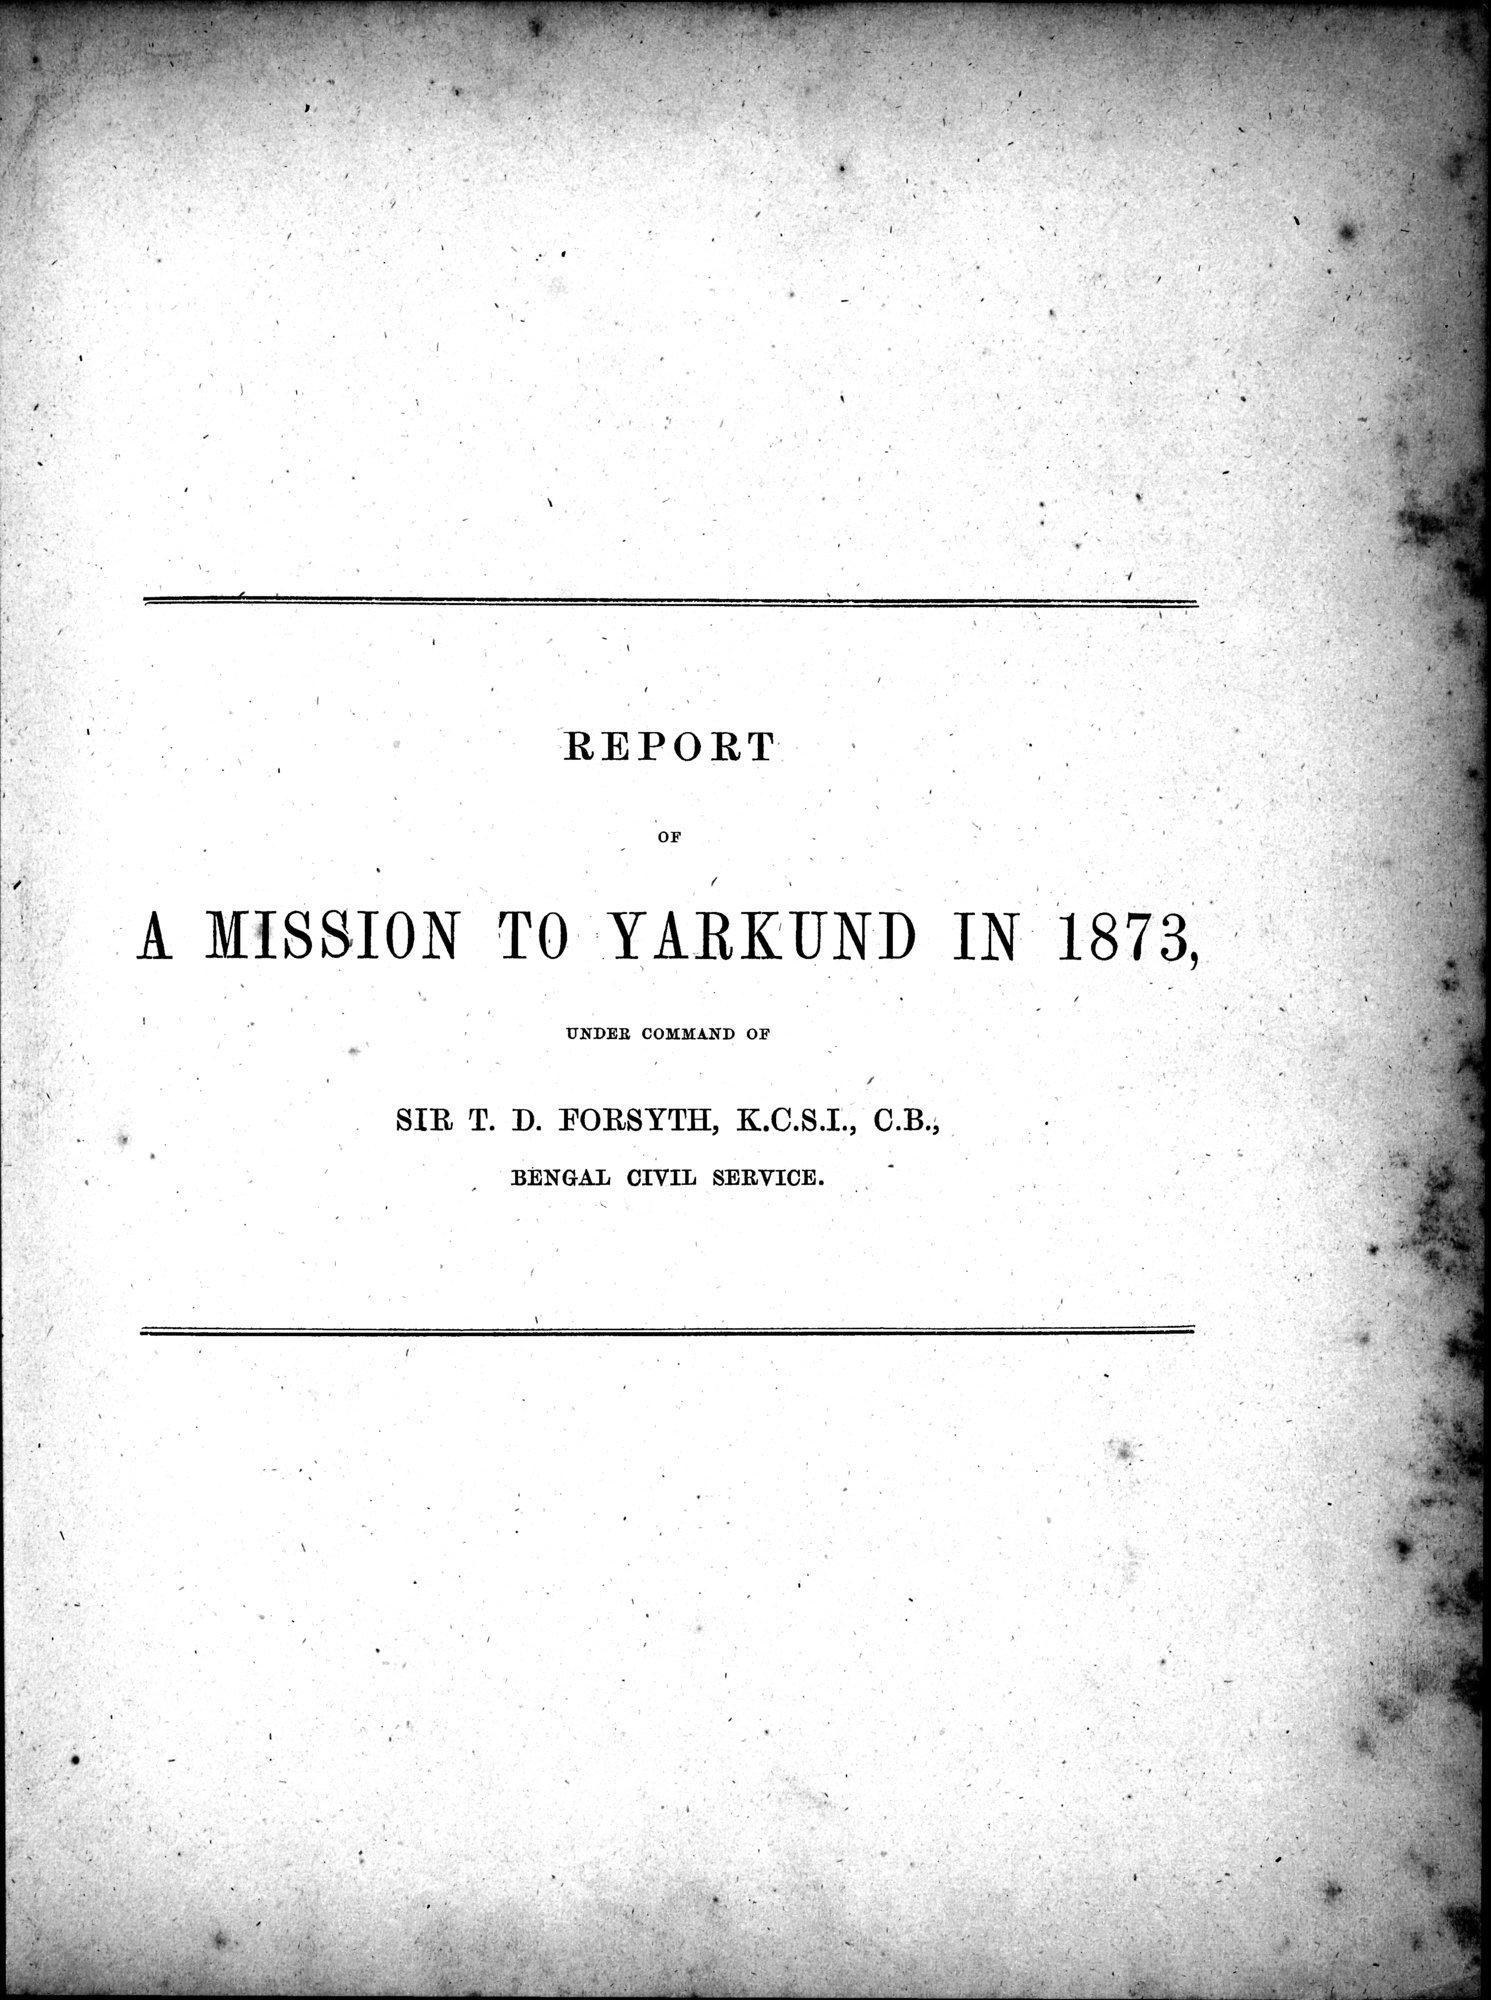 Report of a Mission to Yarkund in 1873 : vol.1 / Page 19 (Grayscale High Resolution Image)